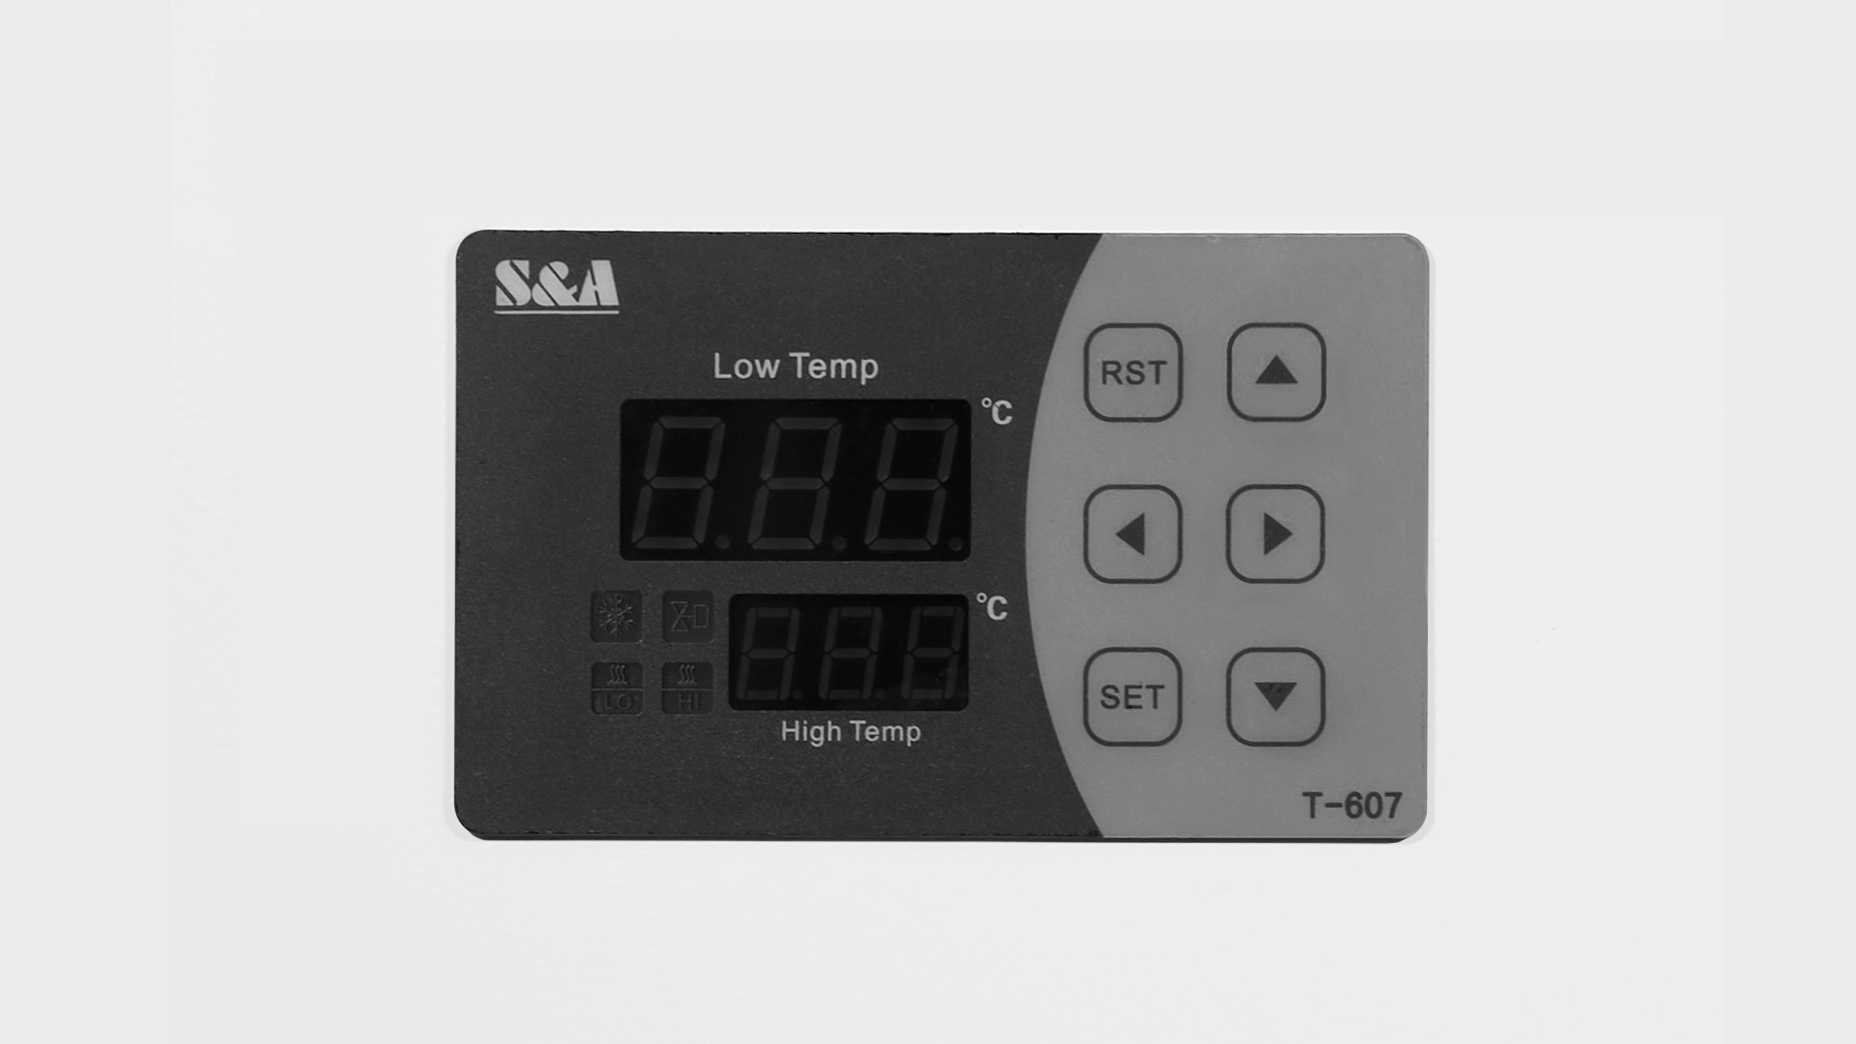 S&A CWFL-1000 Laser Chiller Temperature Controller T-607